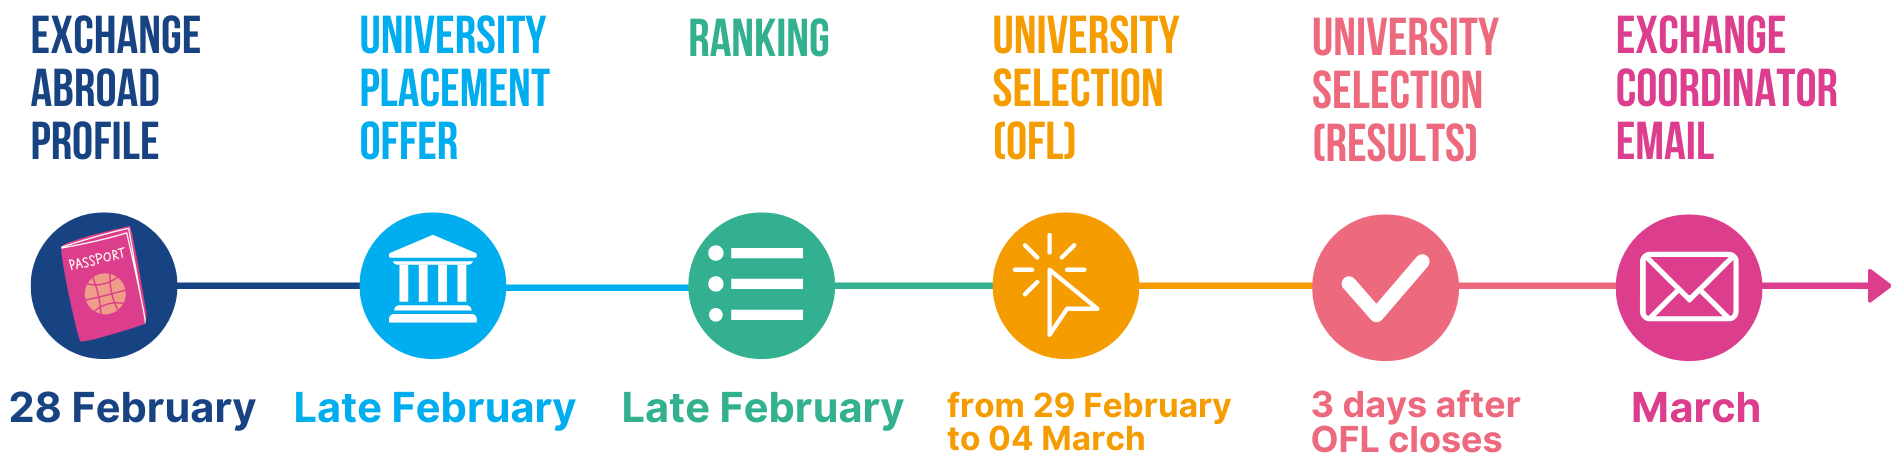 University Selection Timelines (7).png